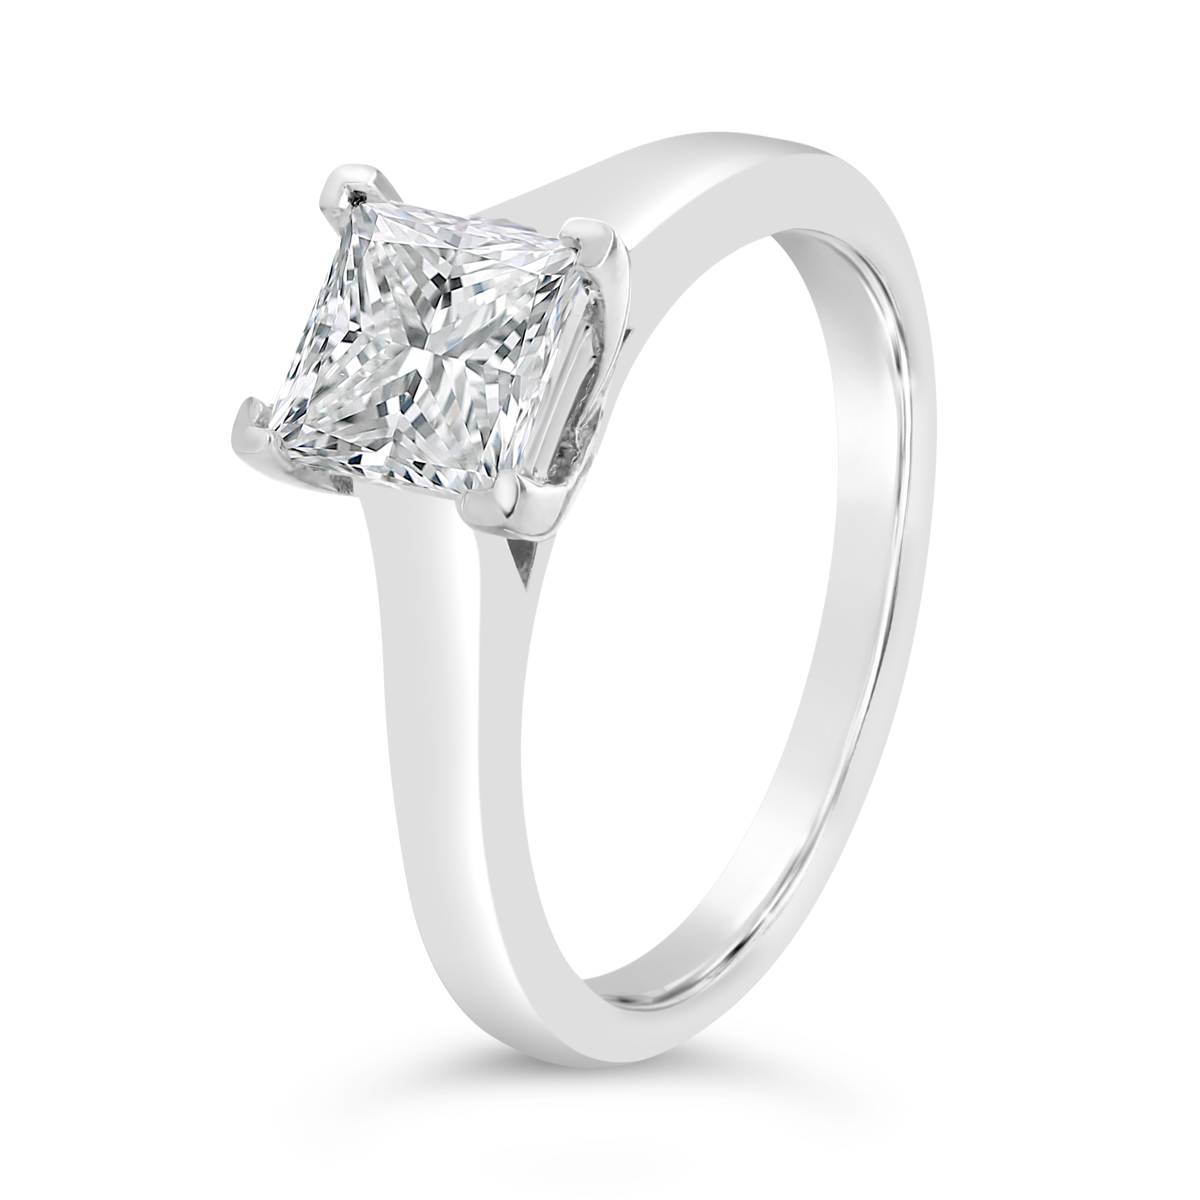 Contact us : Ellissi for Engagement Rings Melbourne CBD,